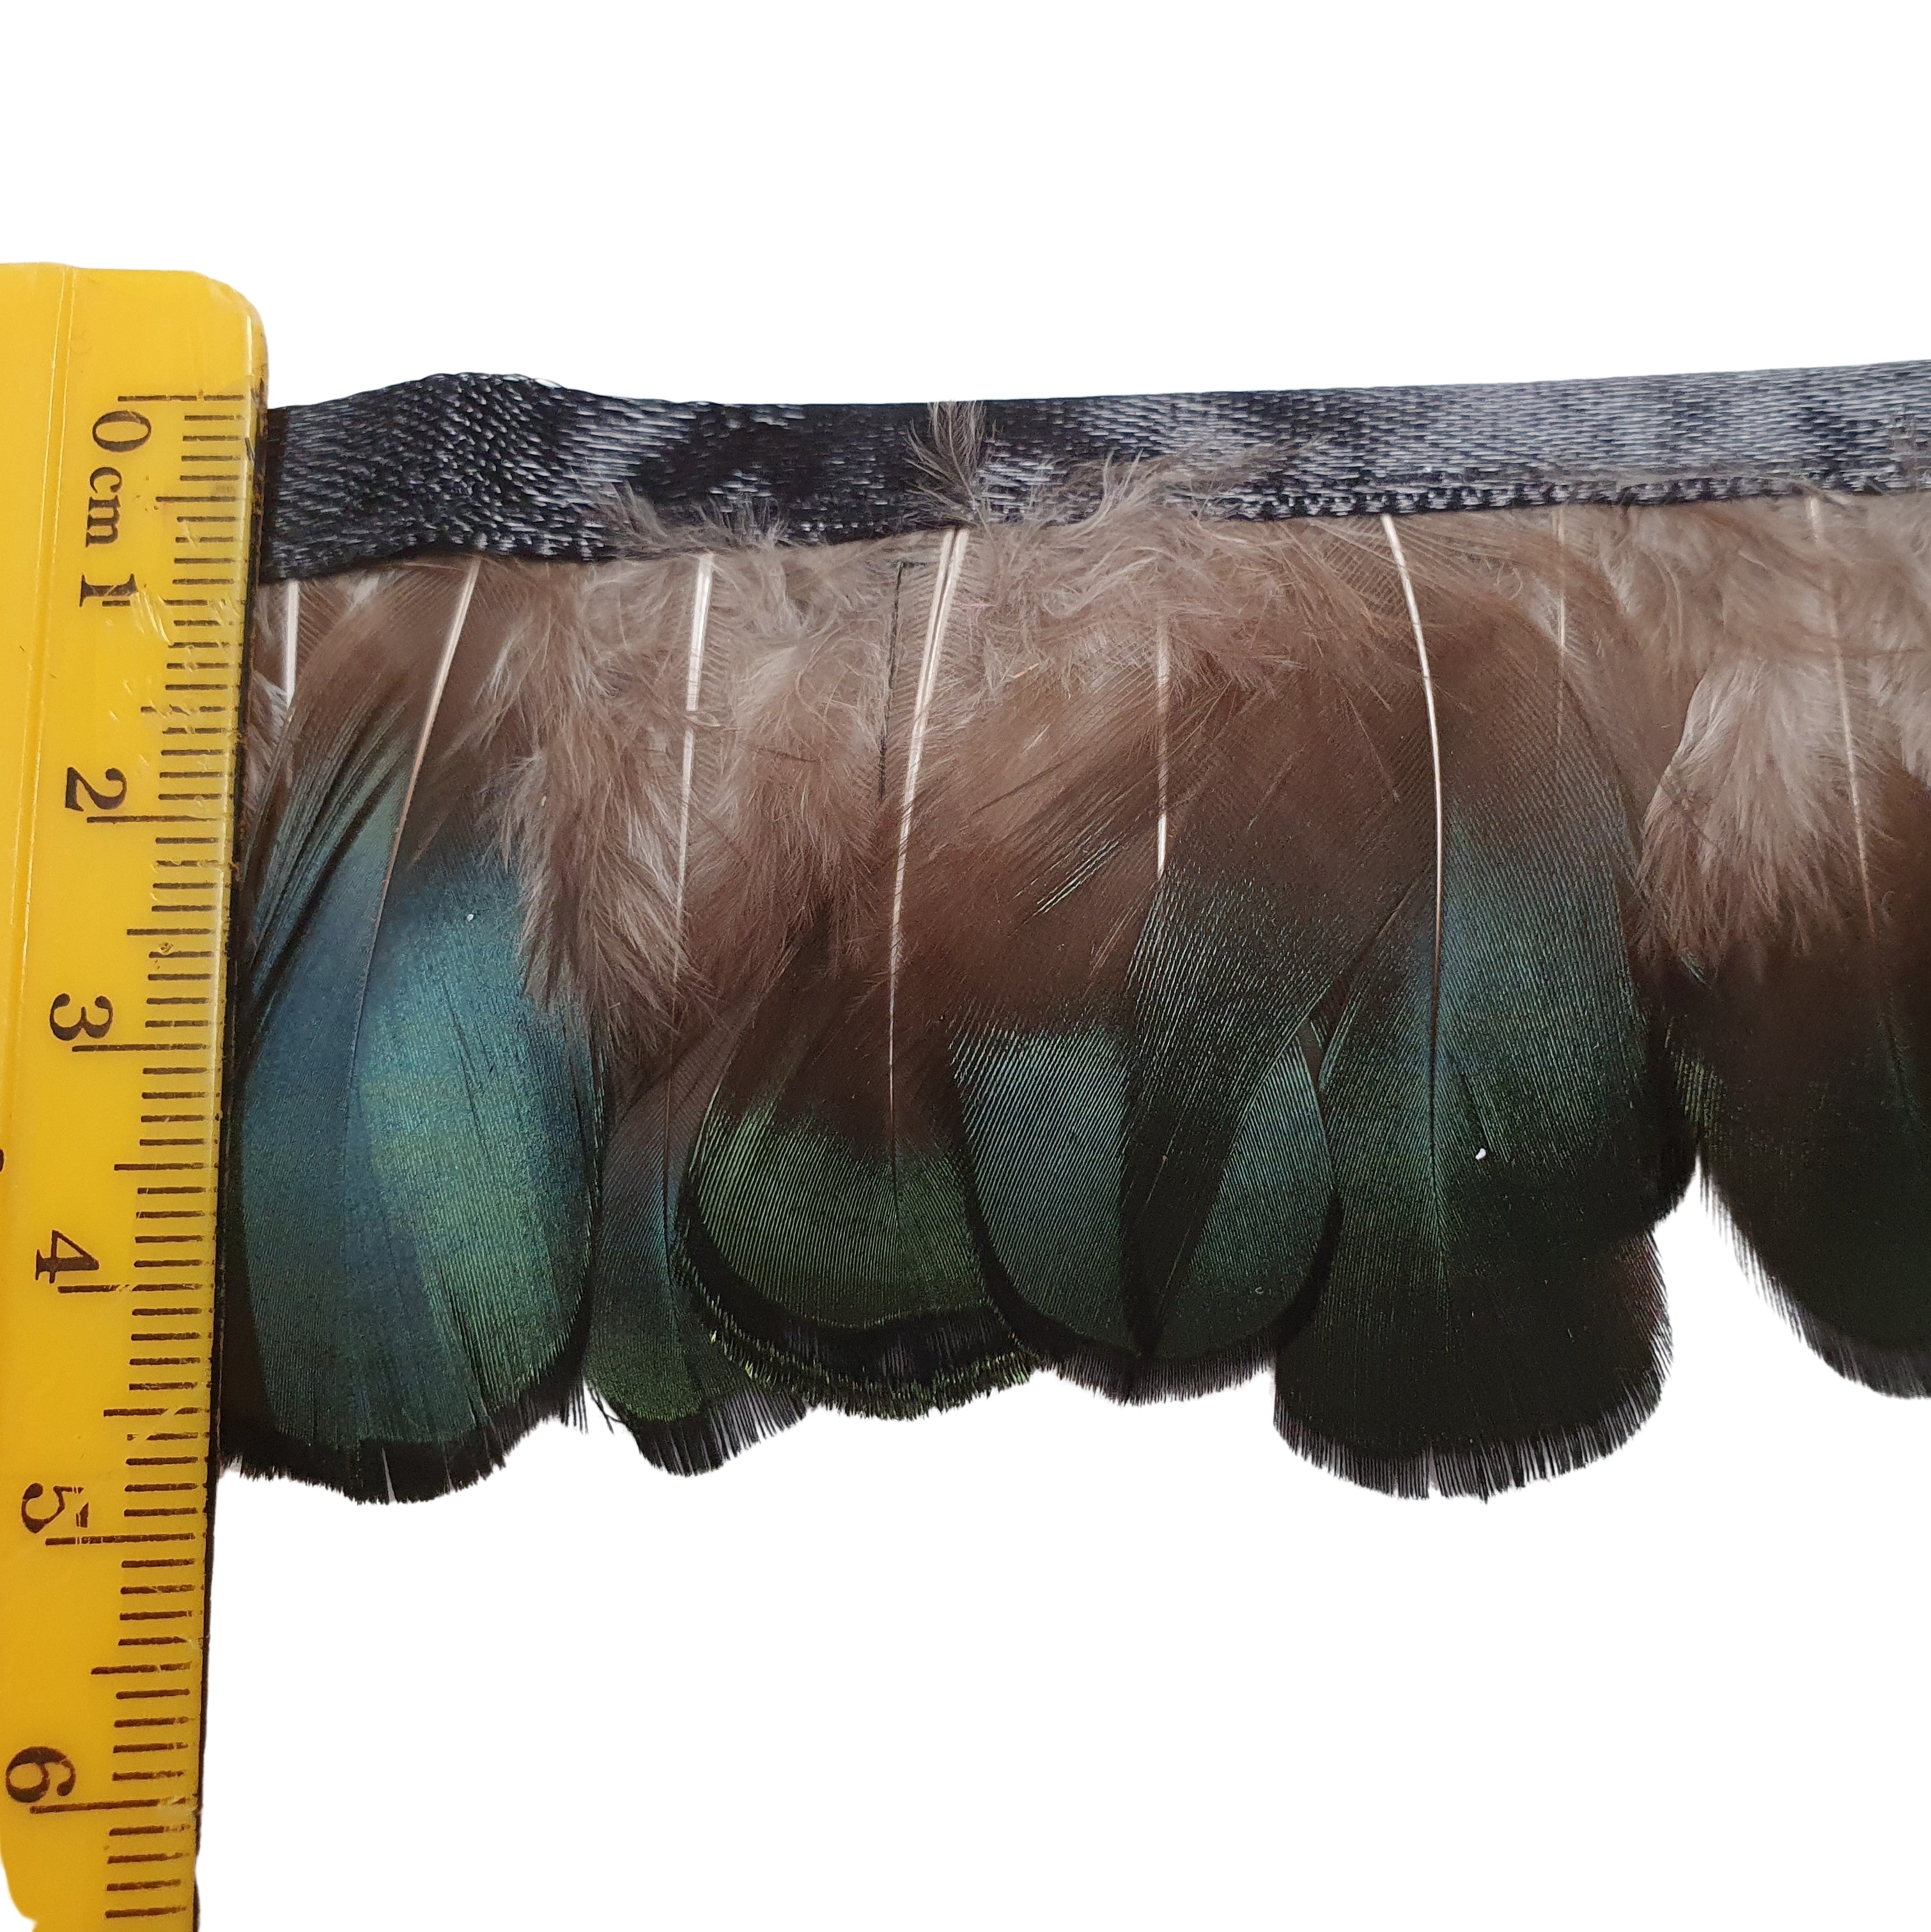 Green Lady Pheasant Feathers on band